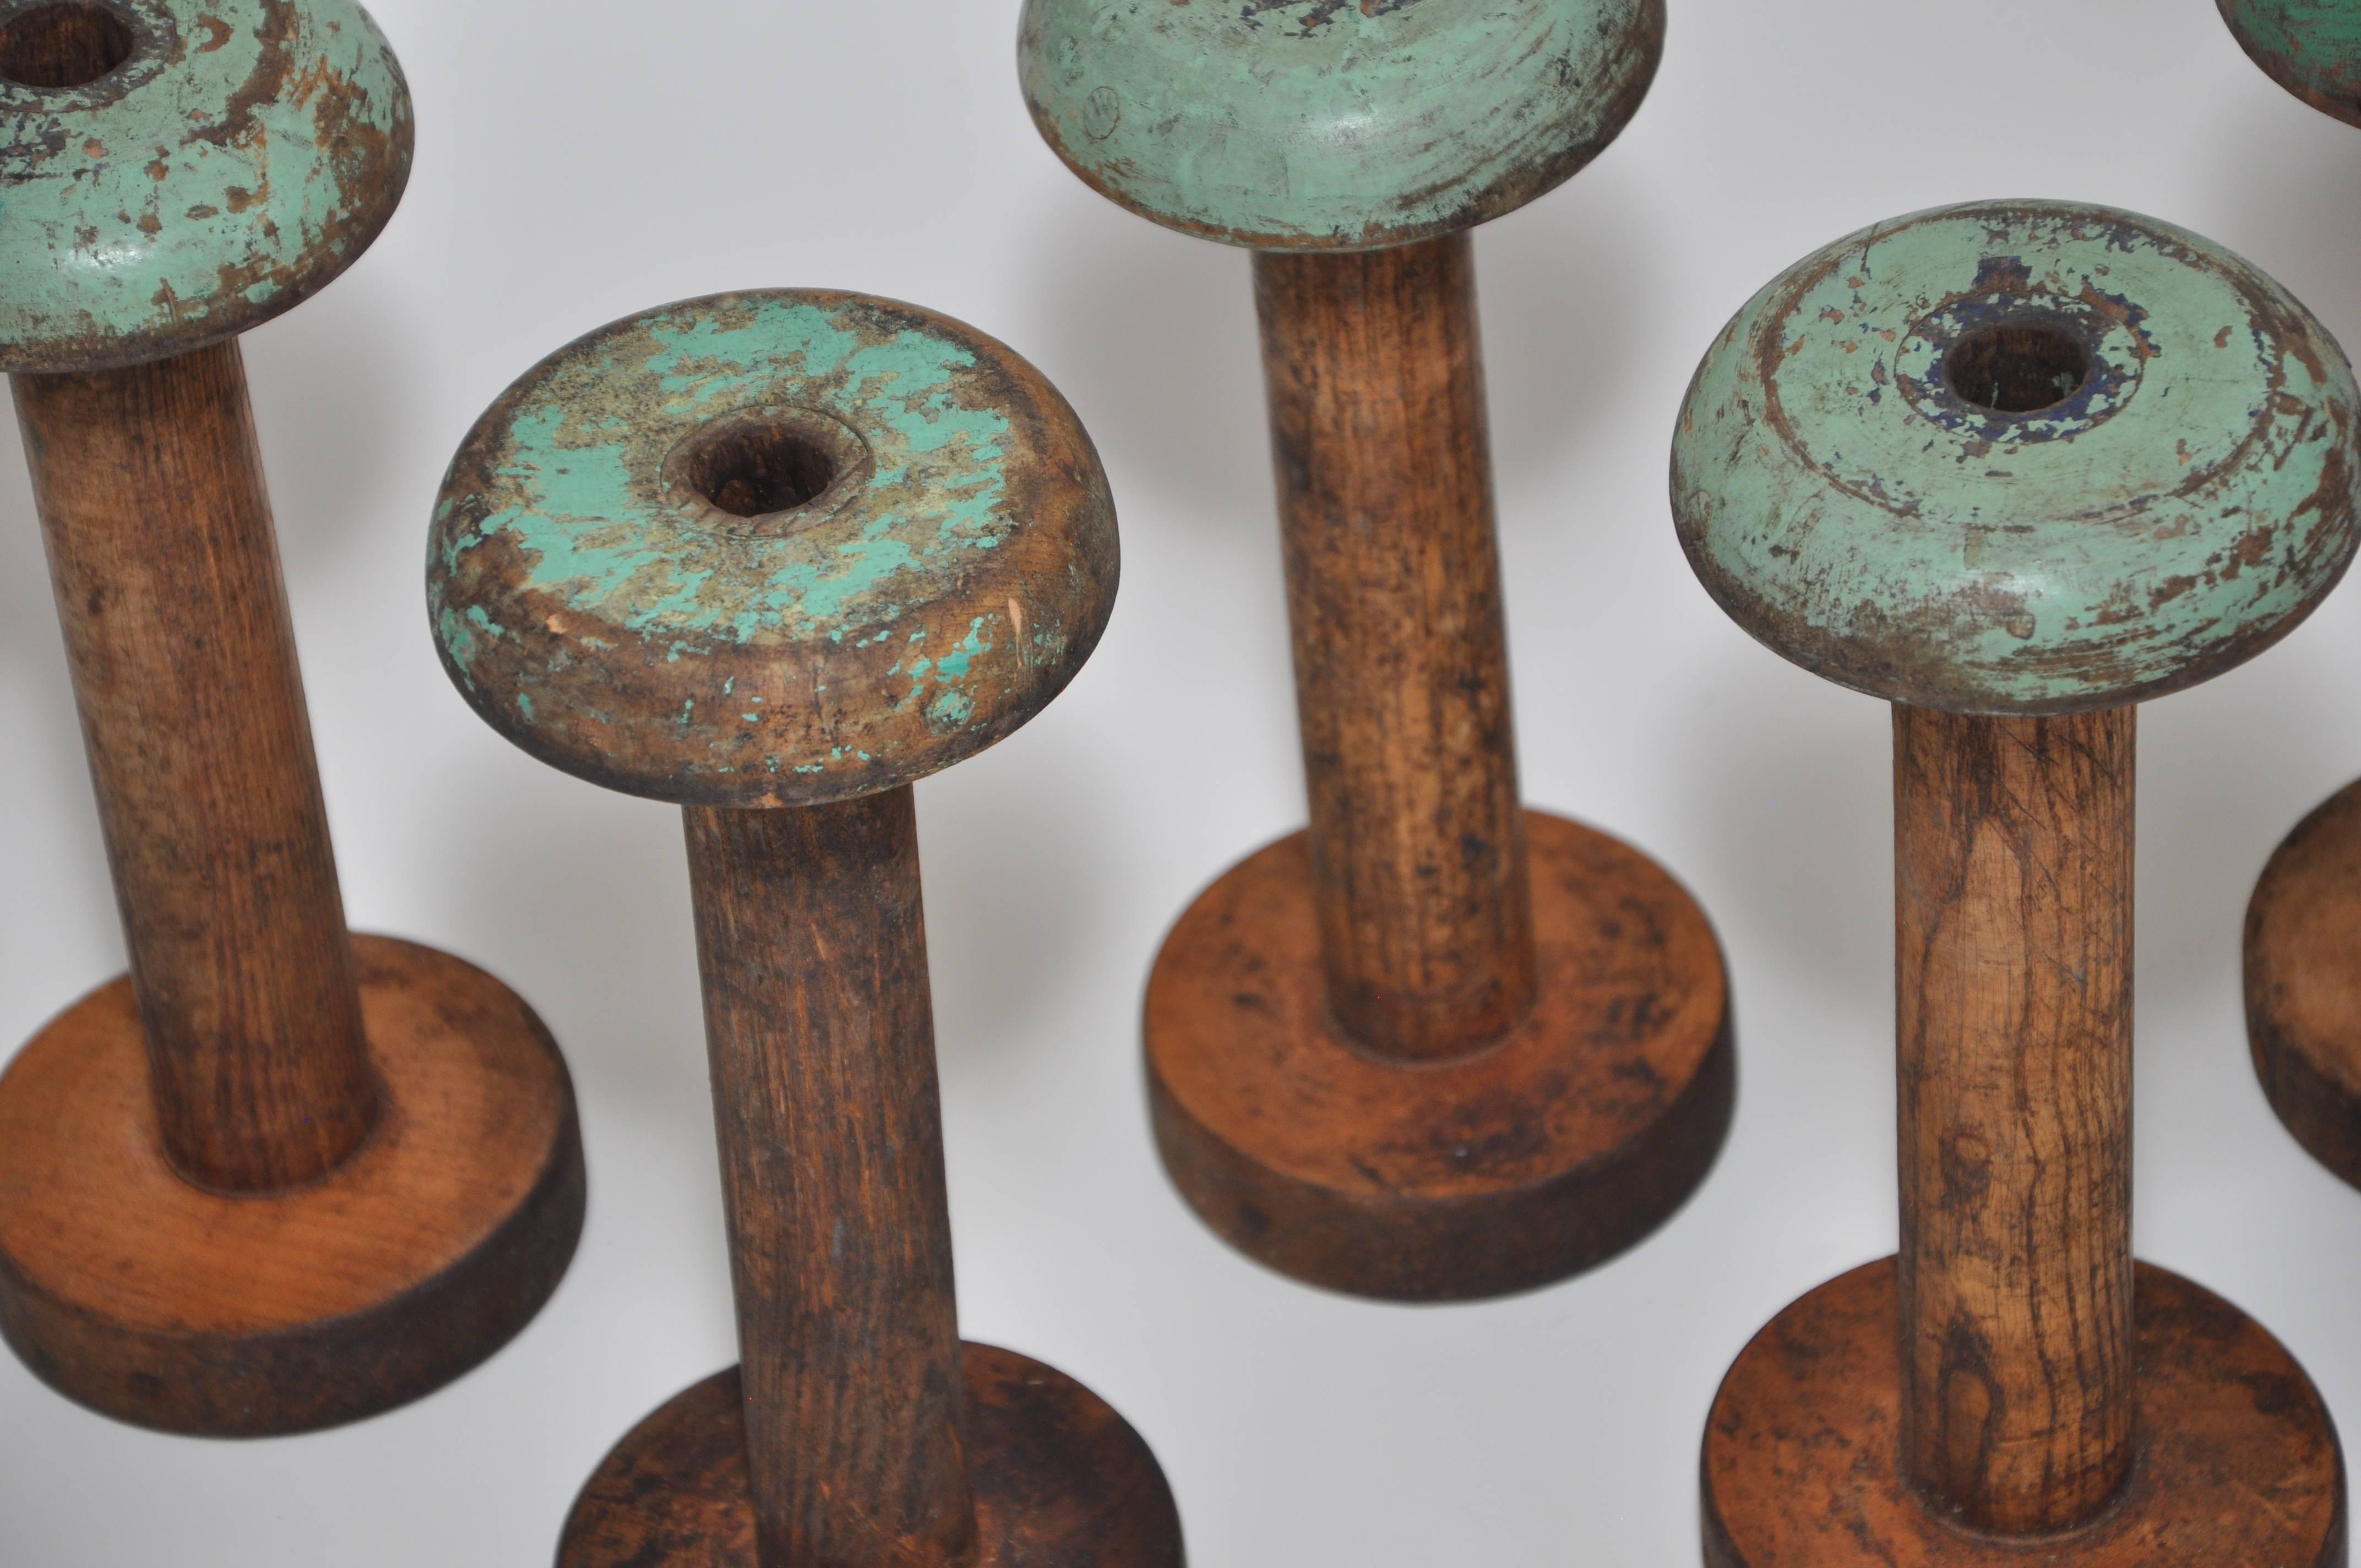 This set of five wooden spools, or bobbins, are lovely vintage relics of traditional Industrial equipment originally from an old Irish linen mill in Country Antrim, Northern Ireland. Northern Ireland was the home of then Irish Linen industry and